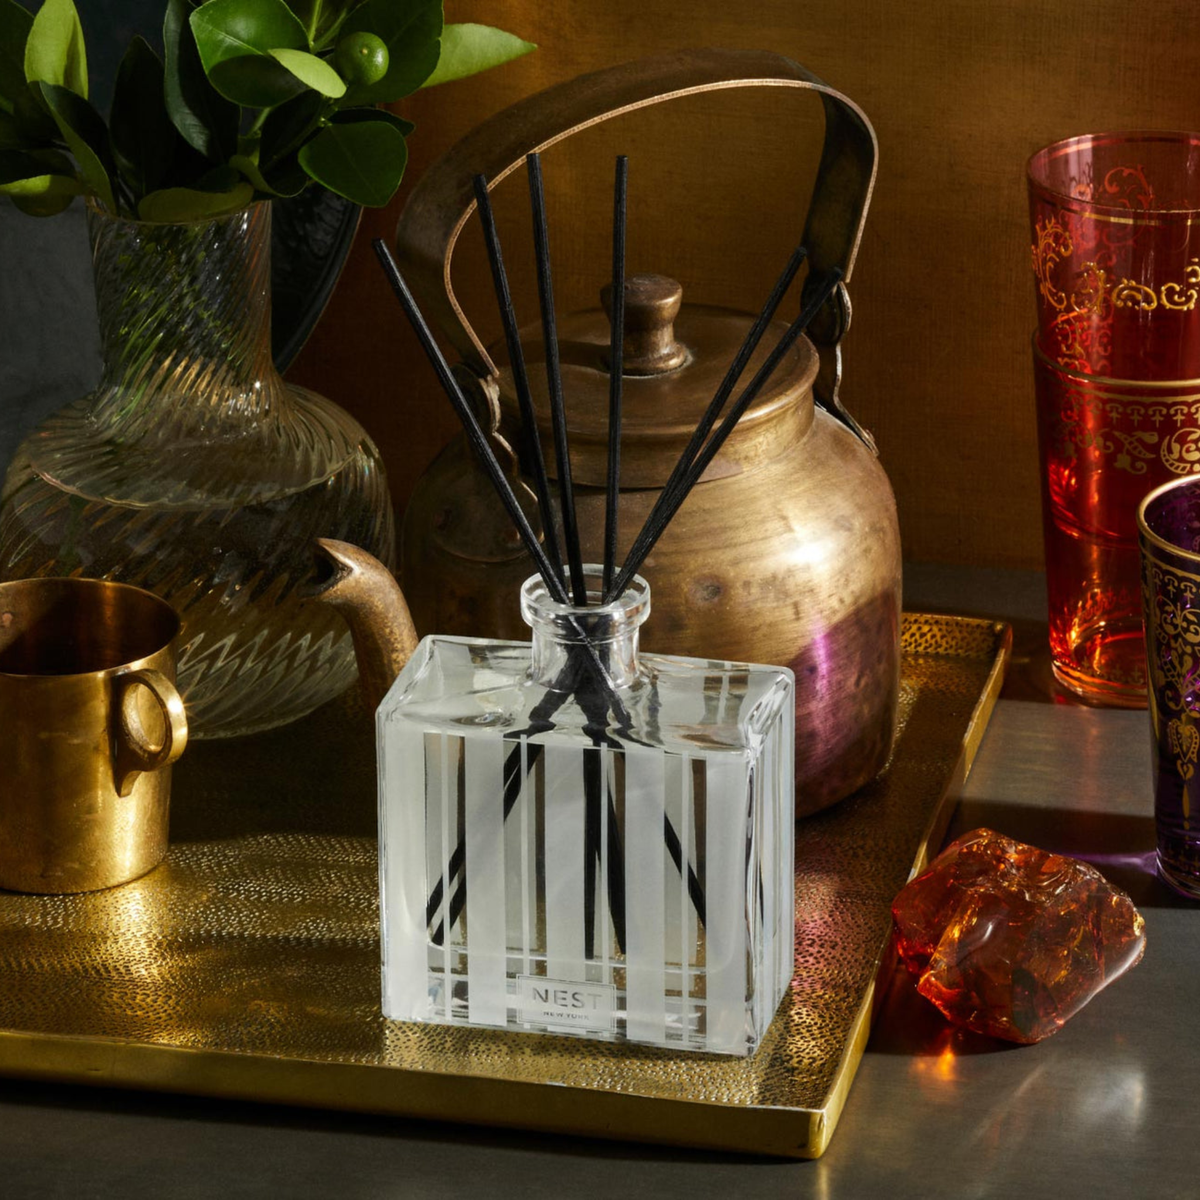 Nest New York’s Moroccan Amber Diffuser Lifestyle in Tray on Counter